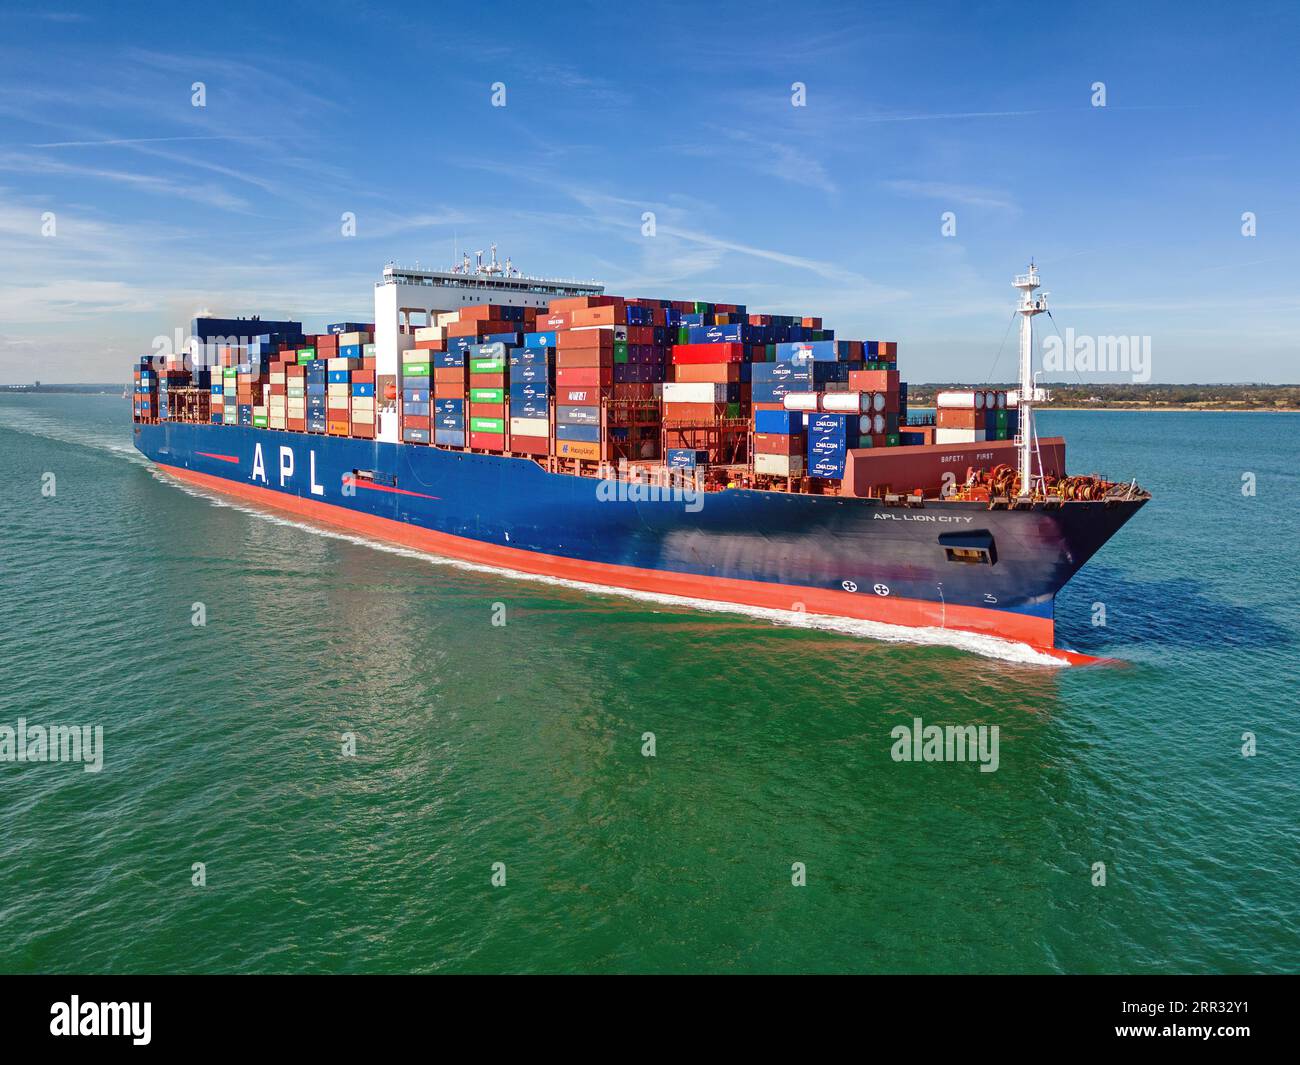 The CMA CGM owned container ship APL Lion City departing the Port of Southampton. Stock Photo